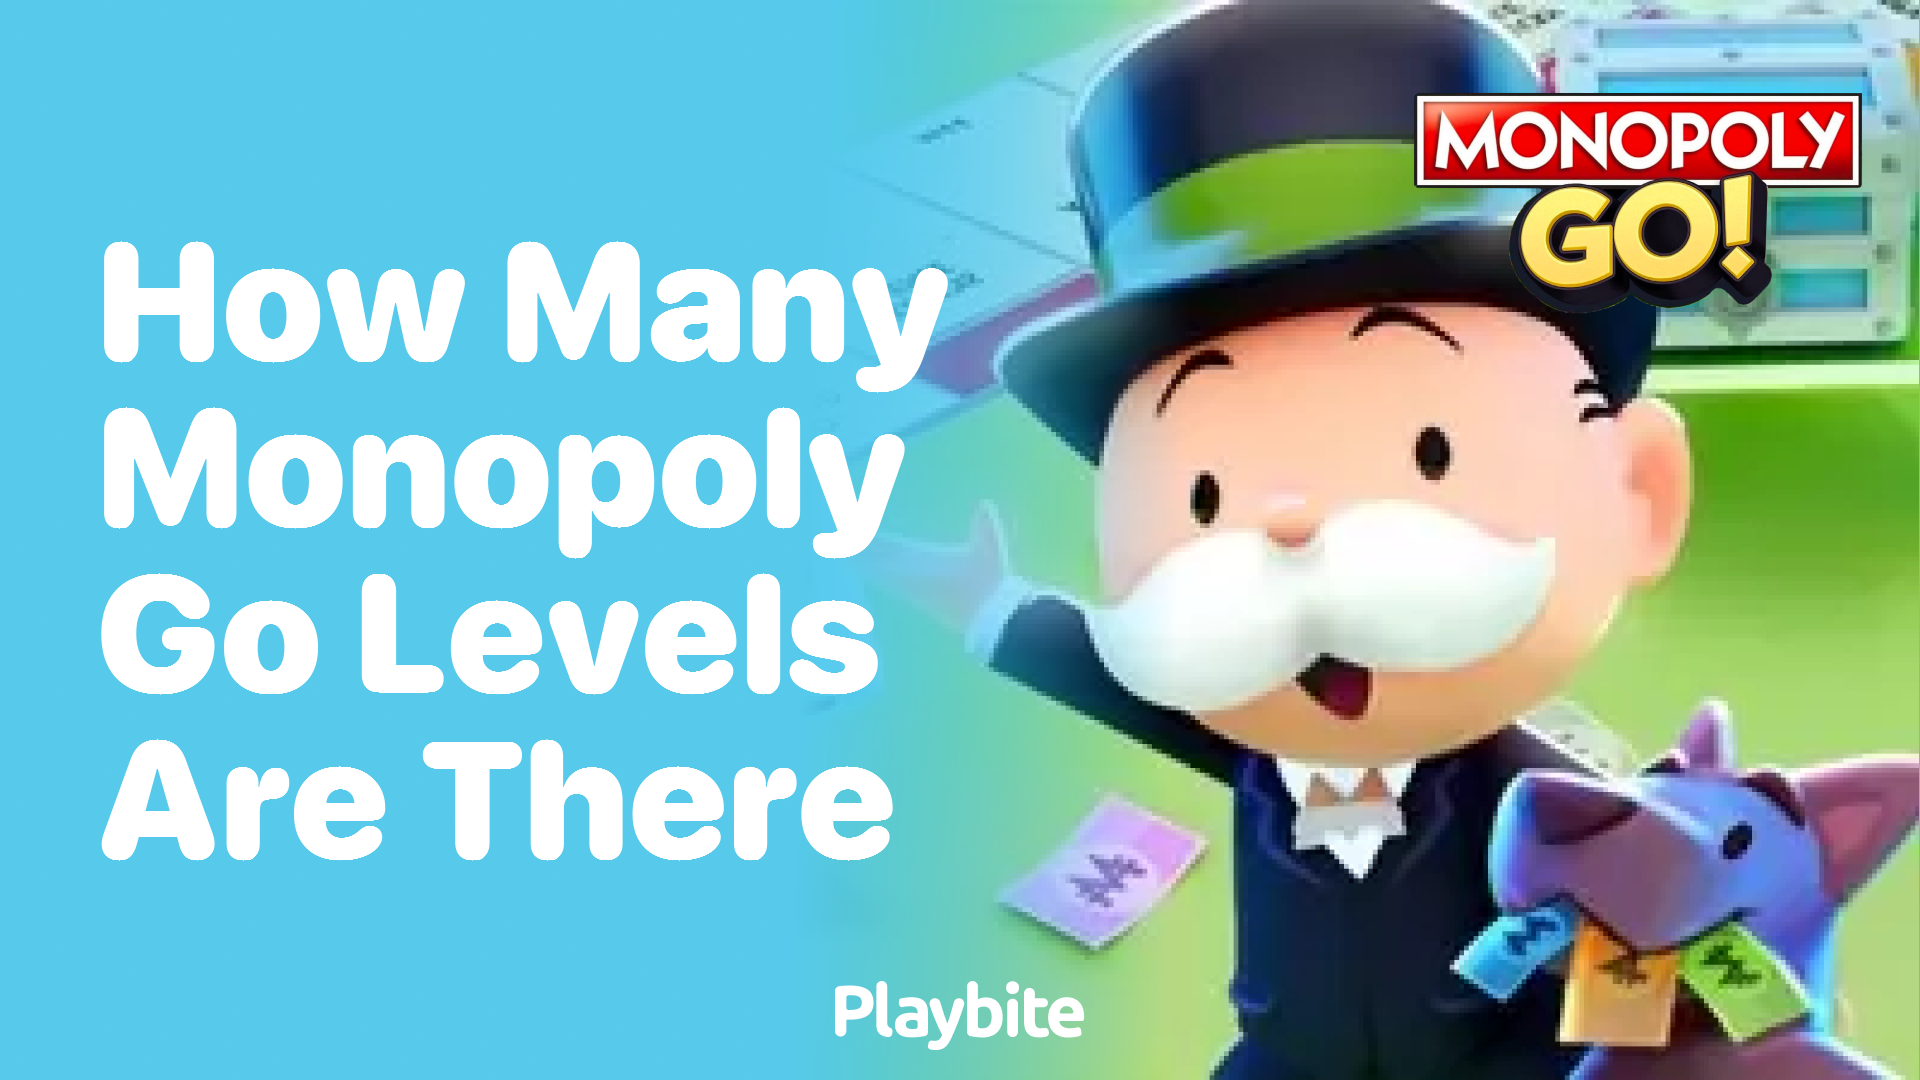 How Many Levels Are There in Monopoly Go?